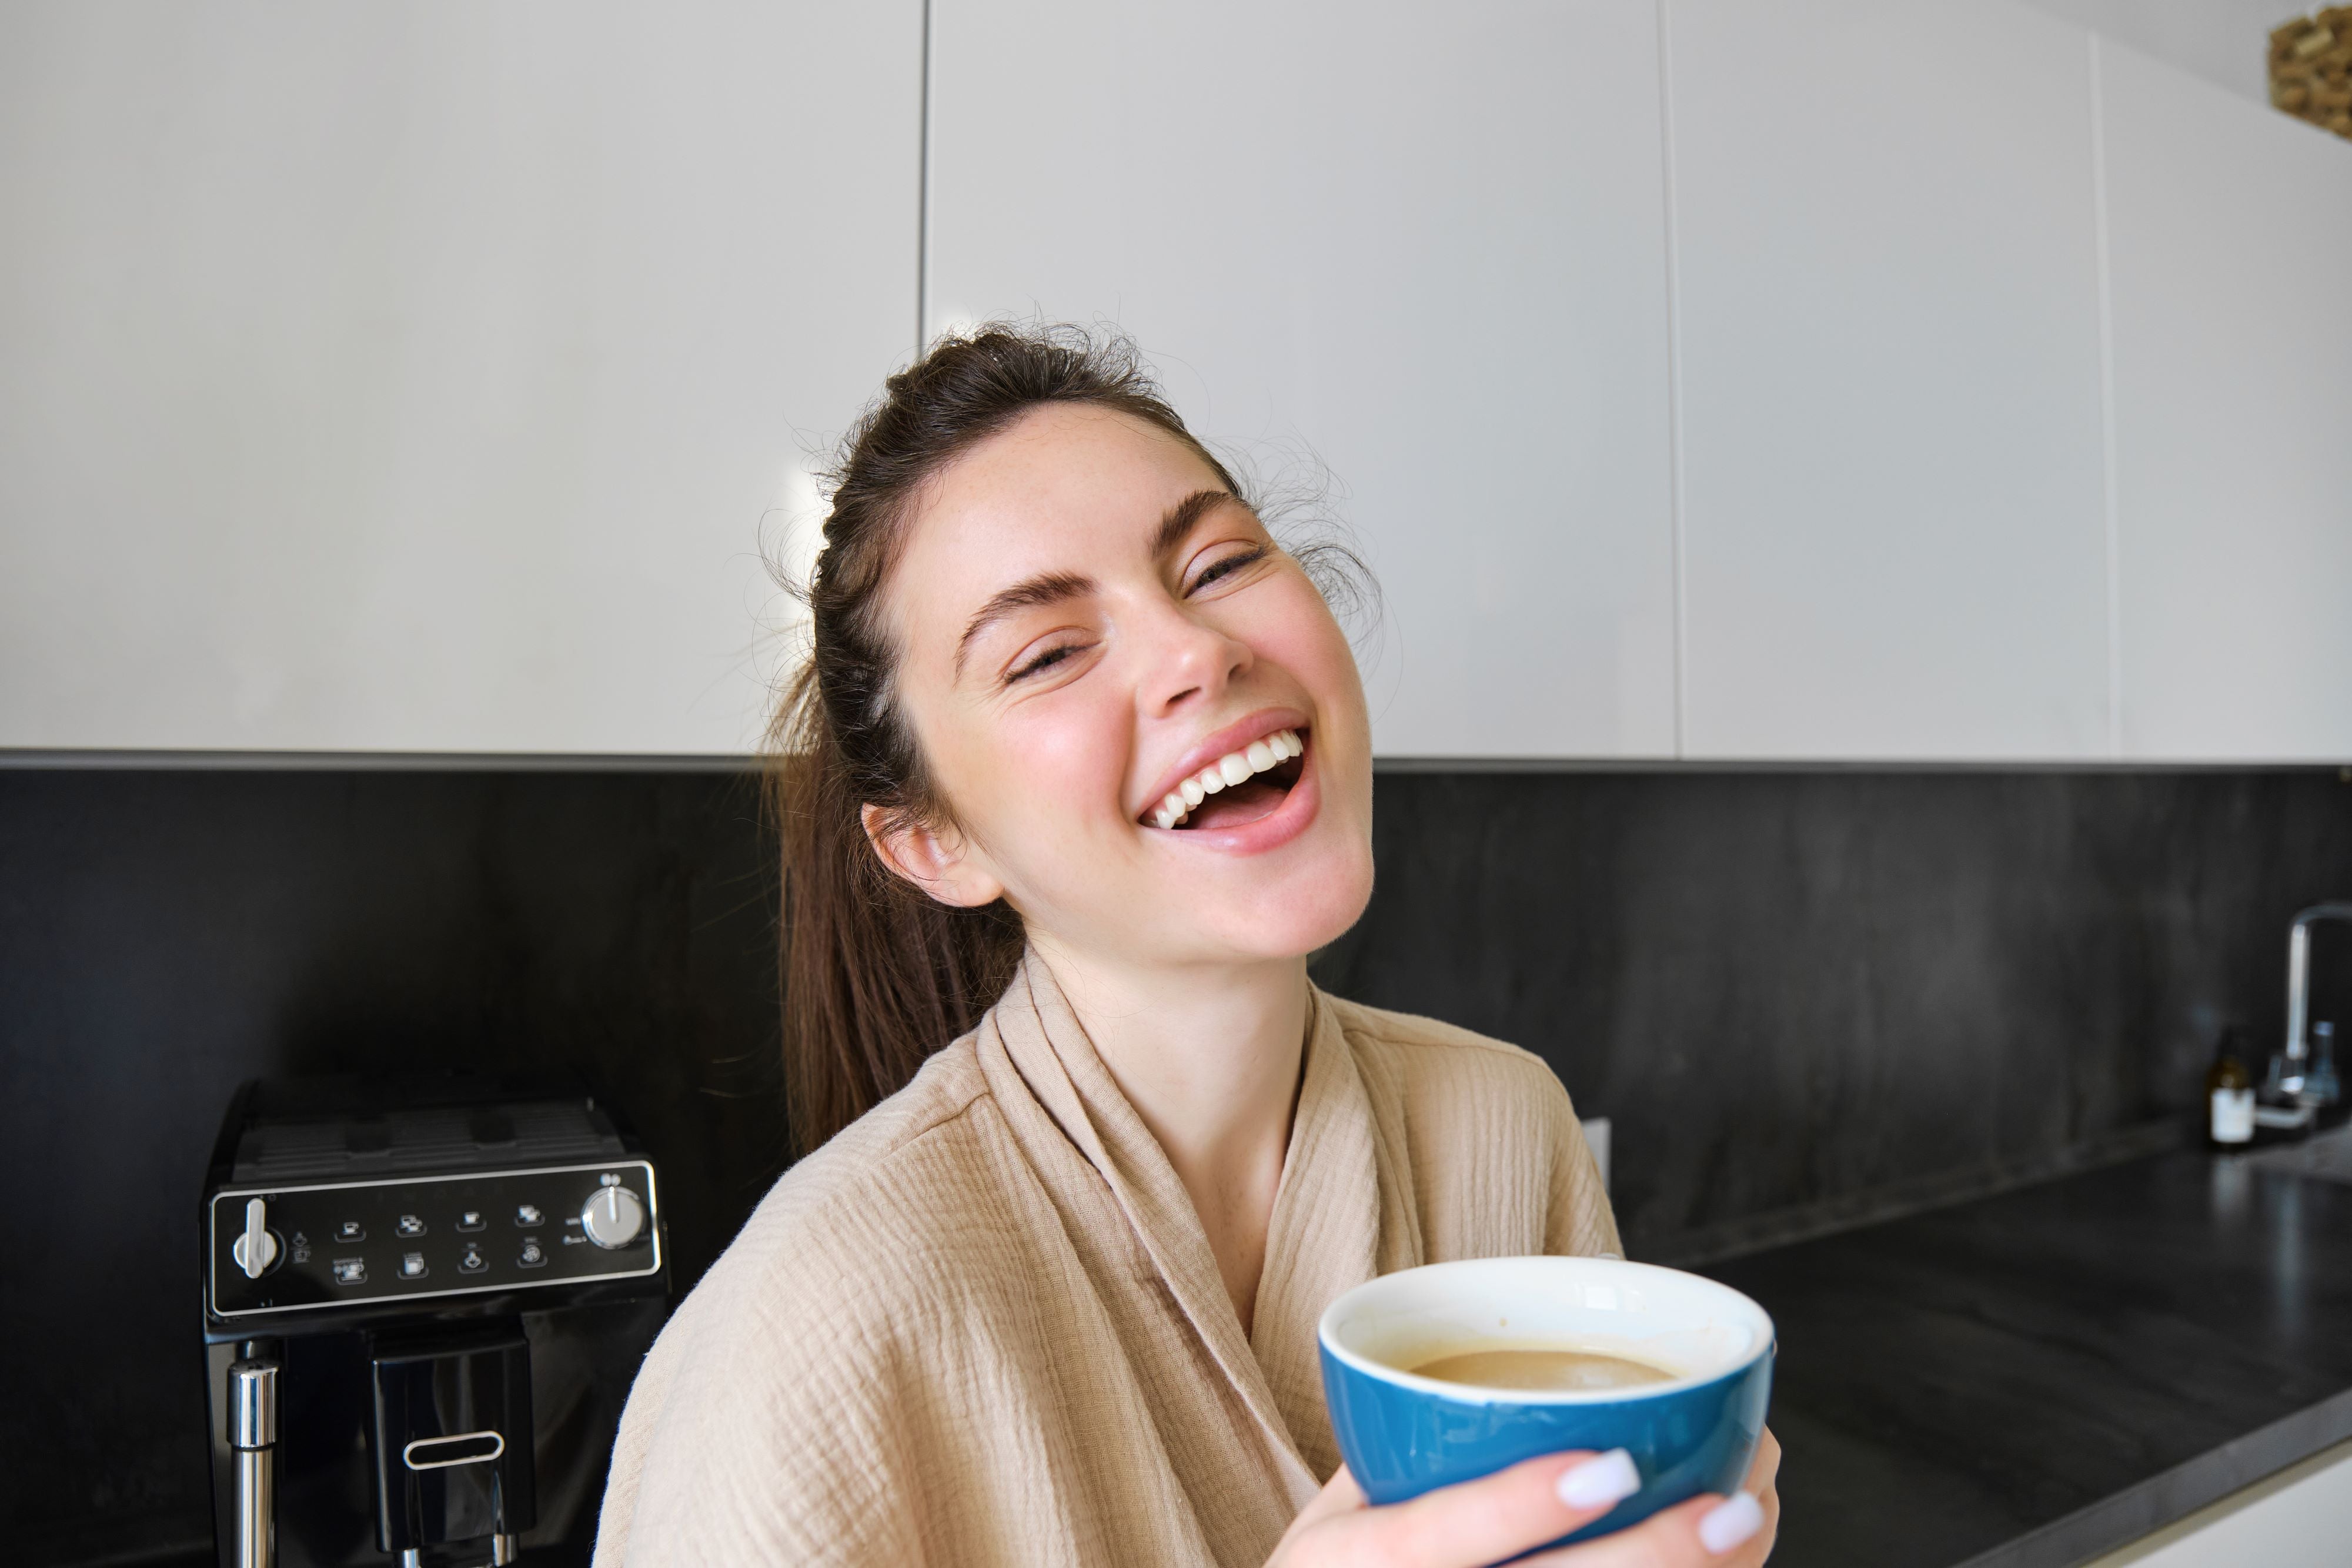 The Surprising Benefits of an ADHD Morning Routine